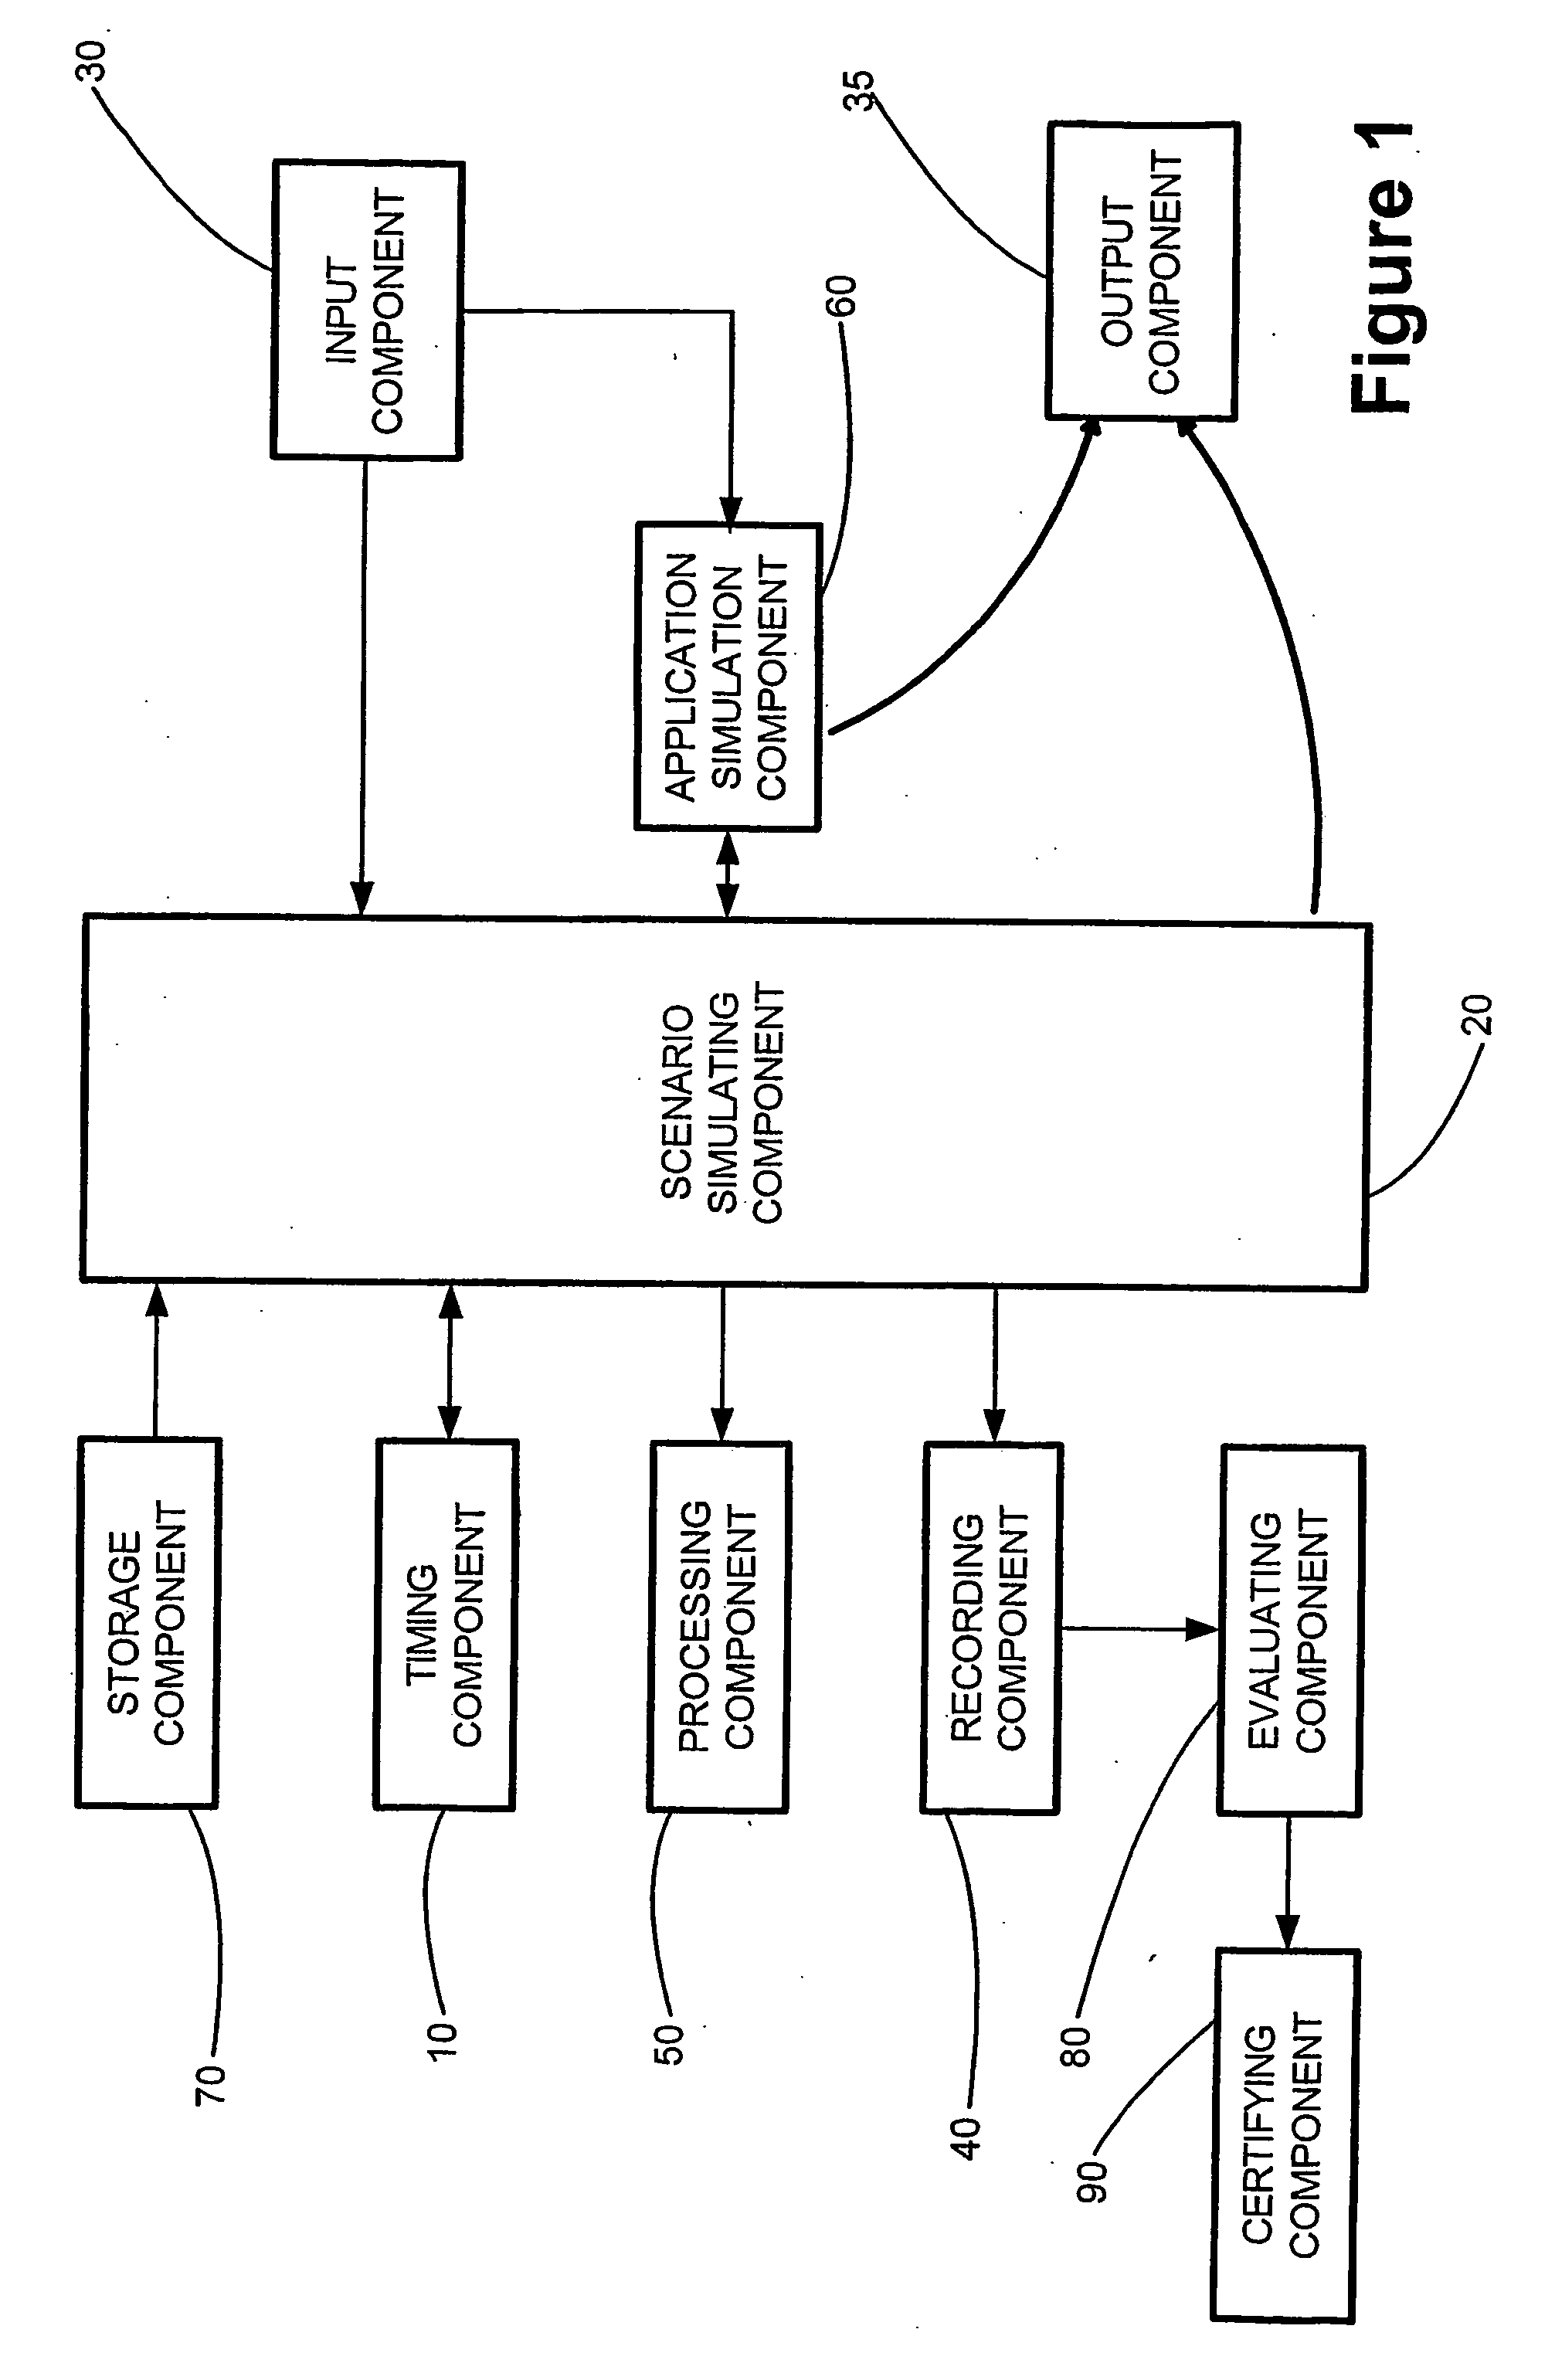 Real-time training simulation system and method